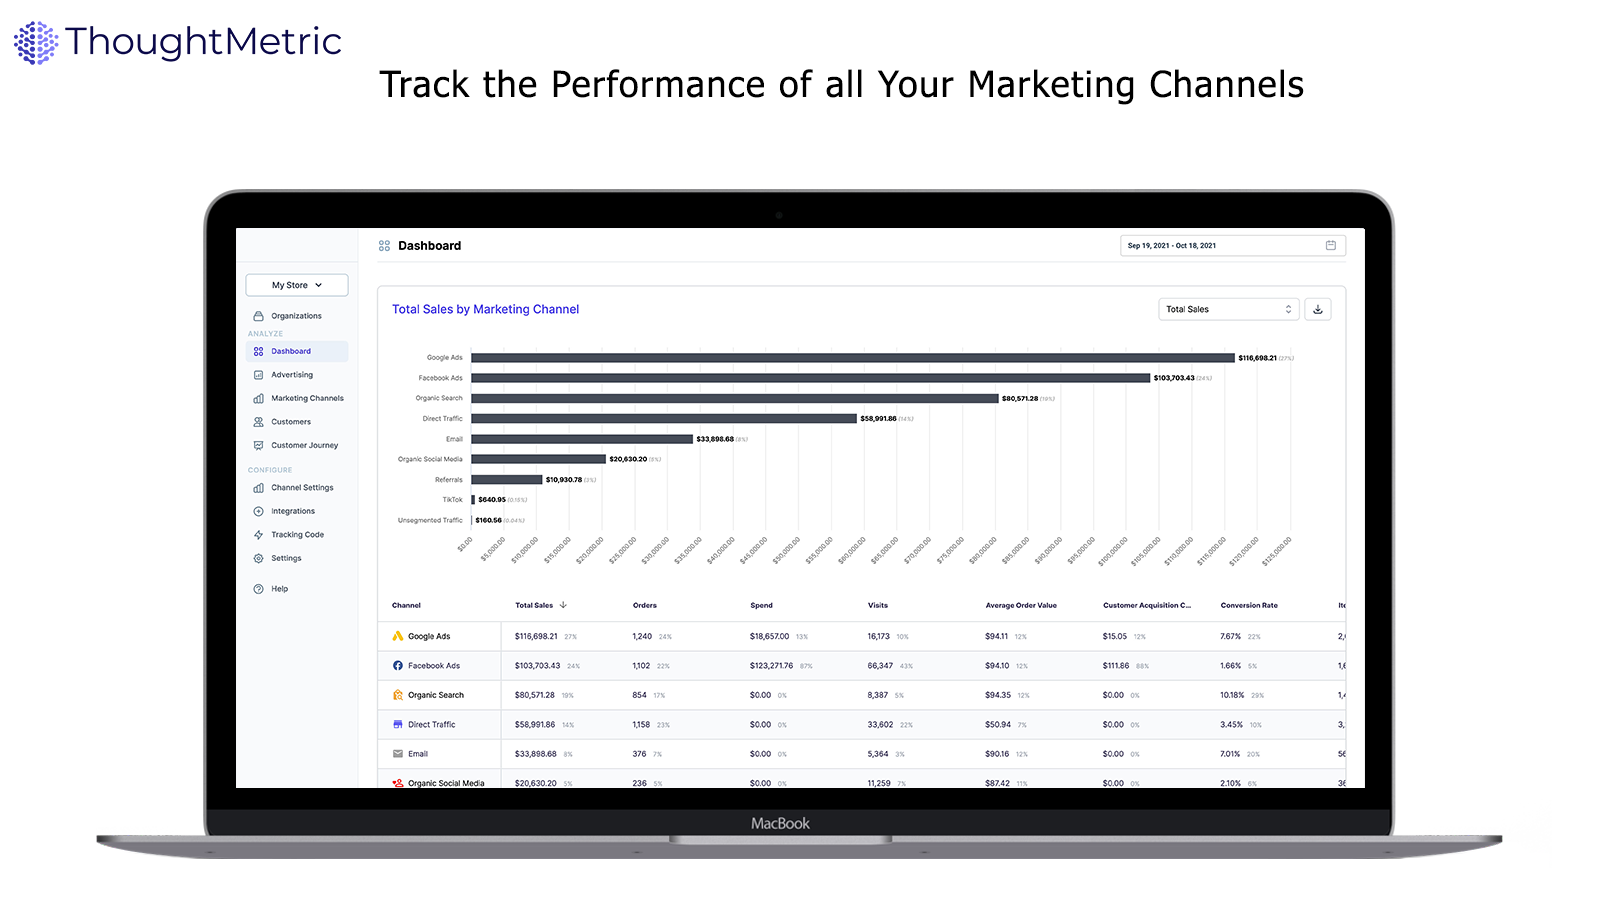 Track the Performance of all Your Marketing Channels